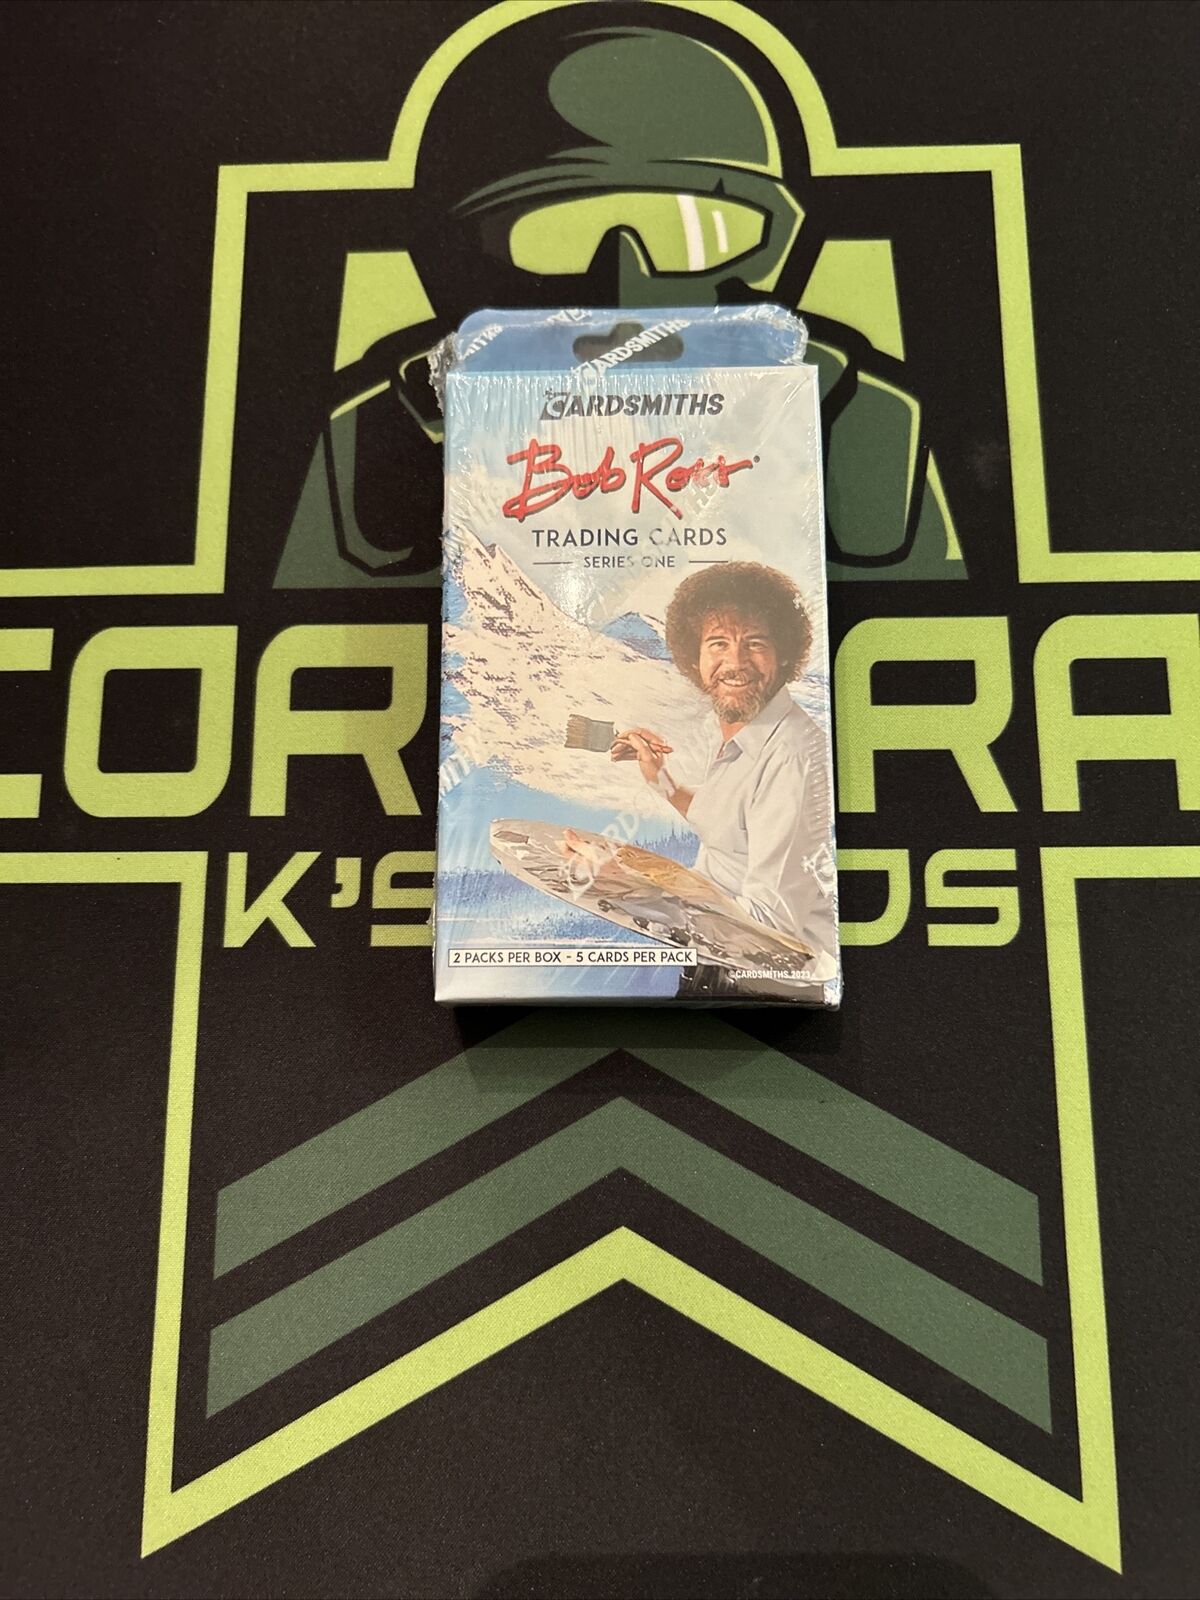 Cardsmiths BOB ROSS Trading Cards Series 1 Collector Box Sealed